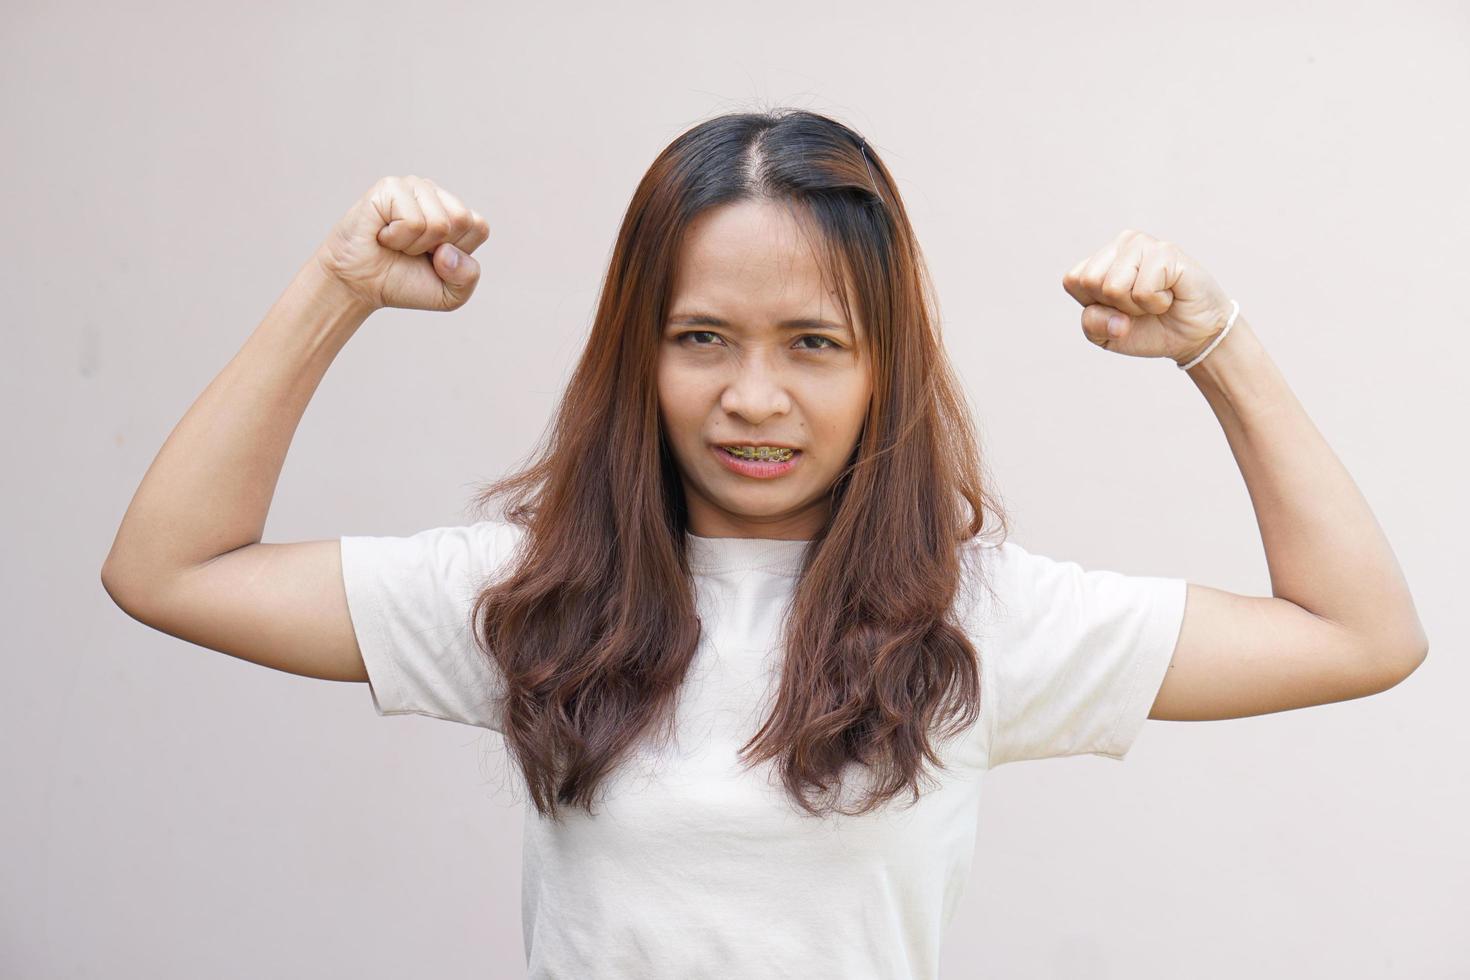 Asian women flex their muscles and show their strength. photo